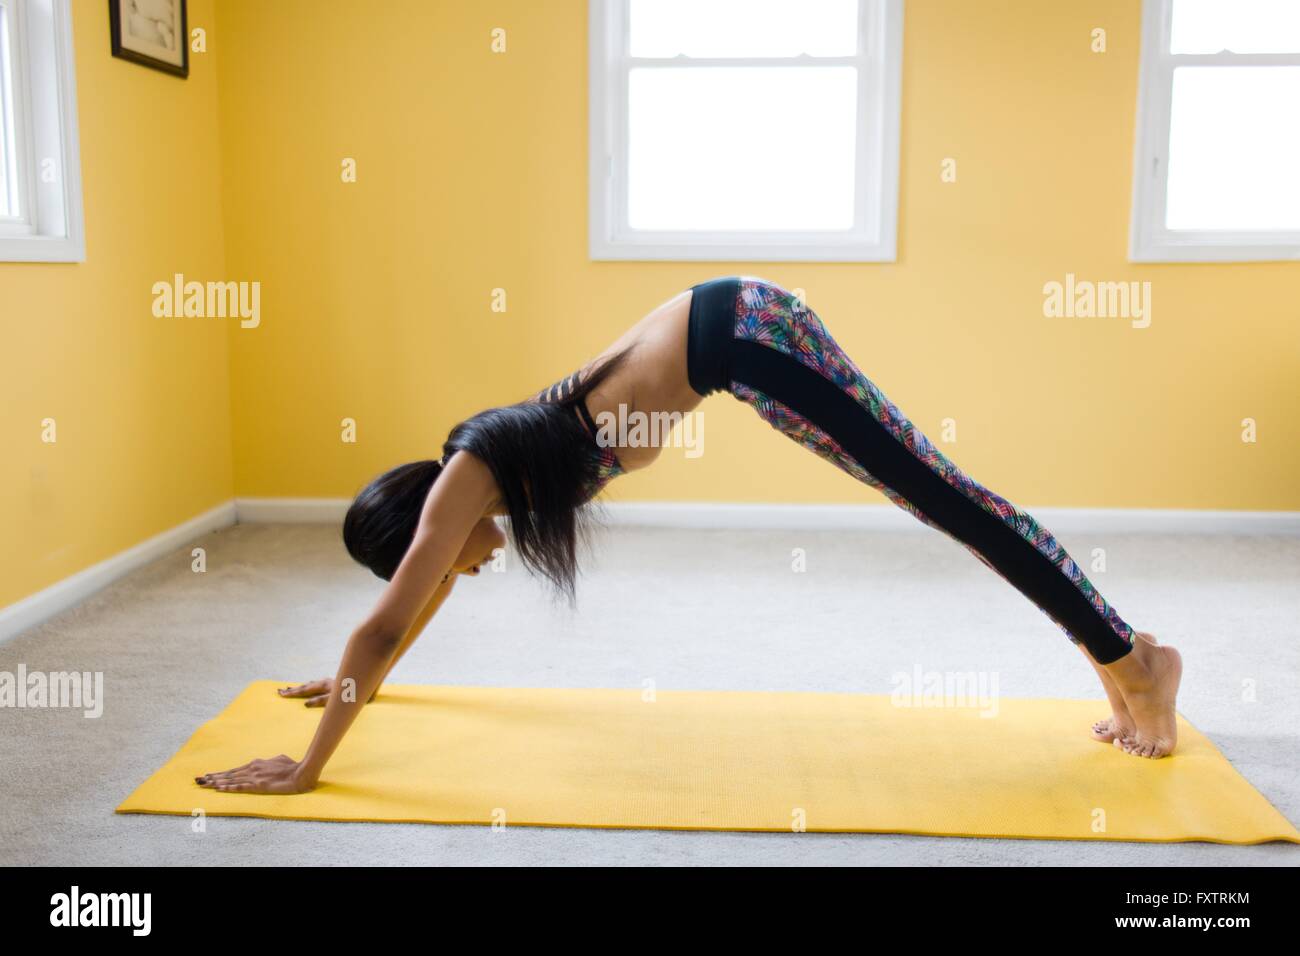 Young woman bending over in yoga pose on yoga mat Stock Photo